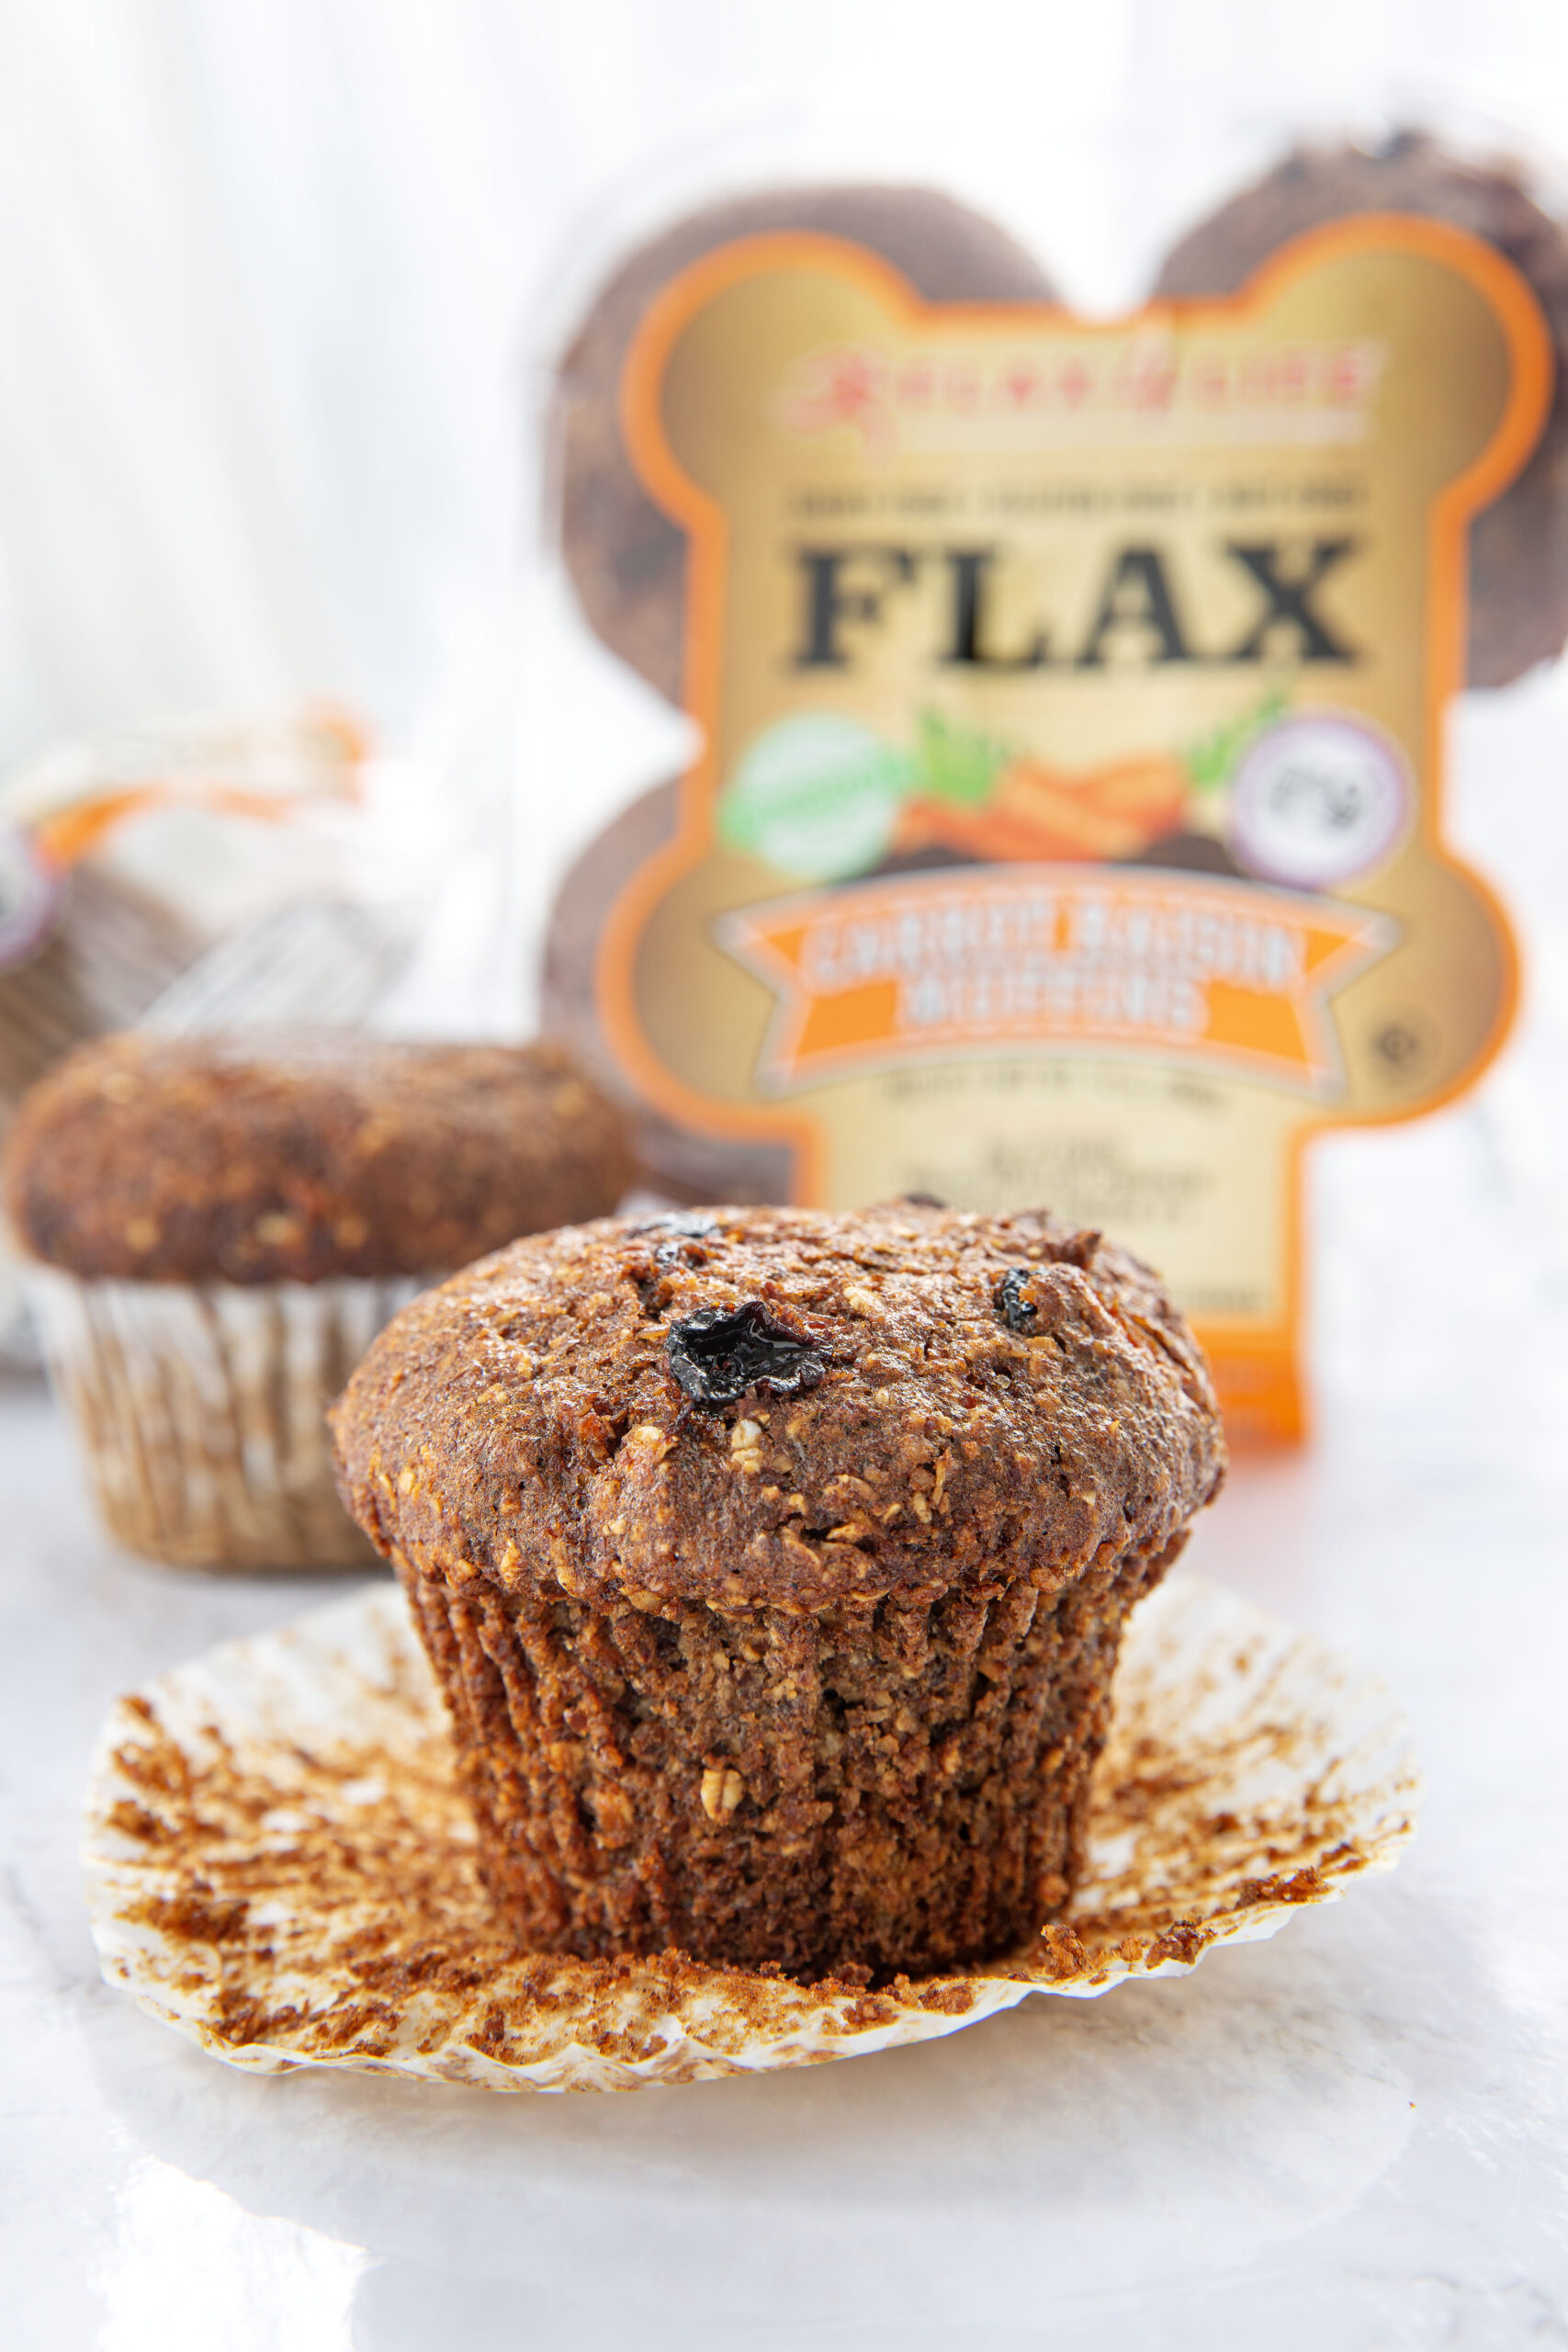 Flax4life muffins with the wraper in the bakc. 